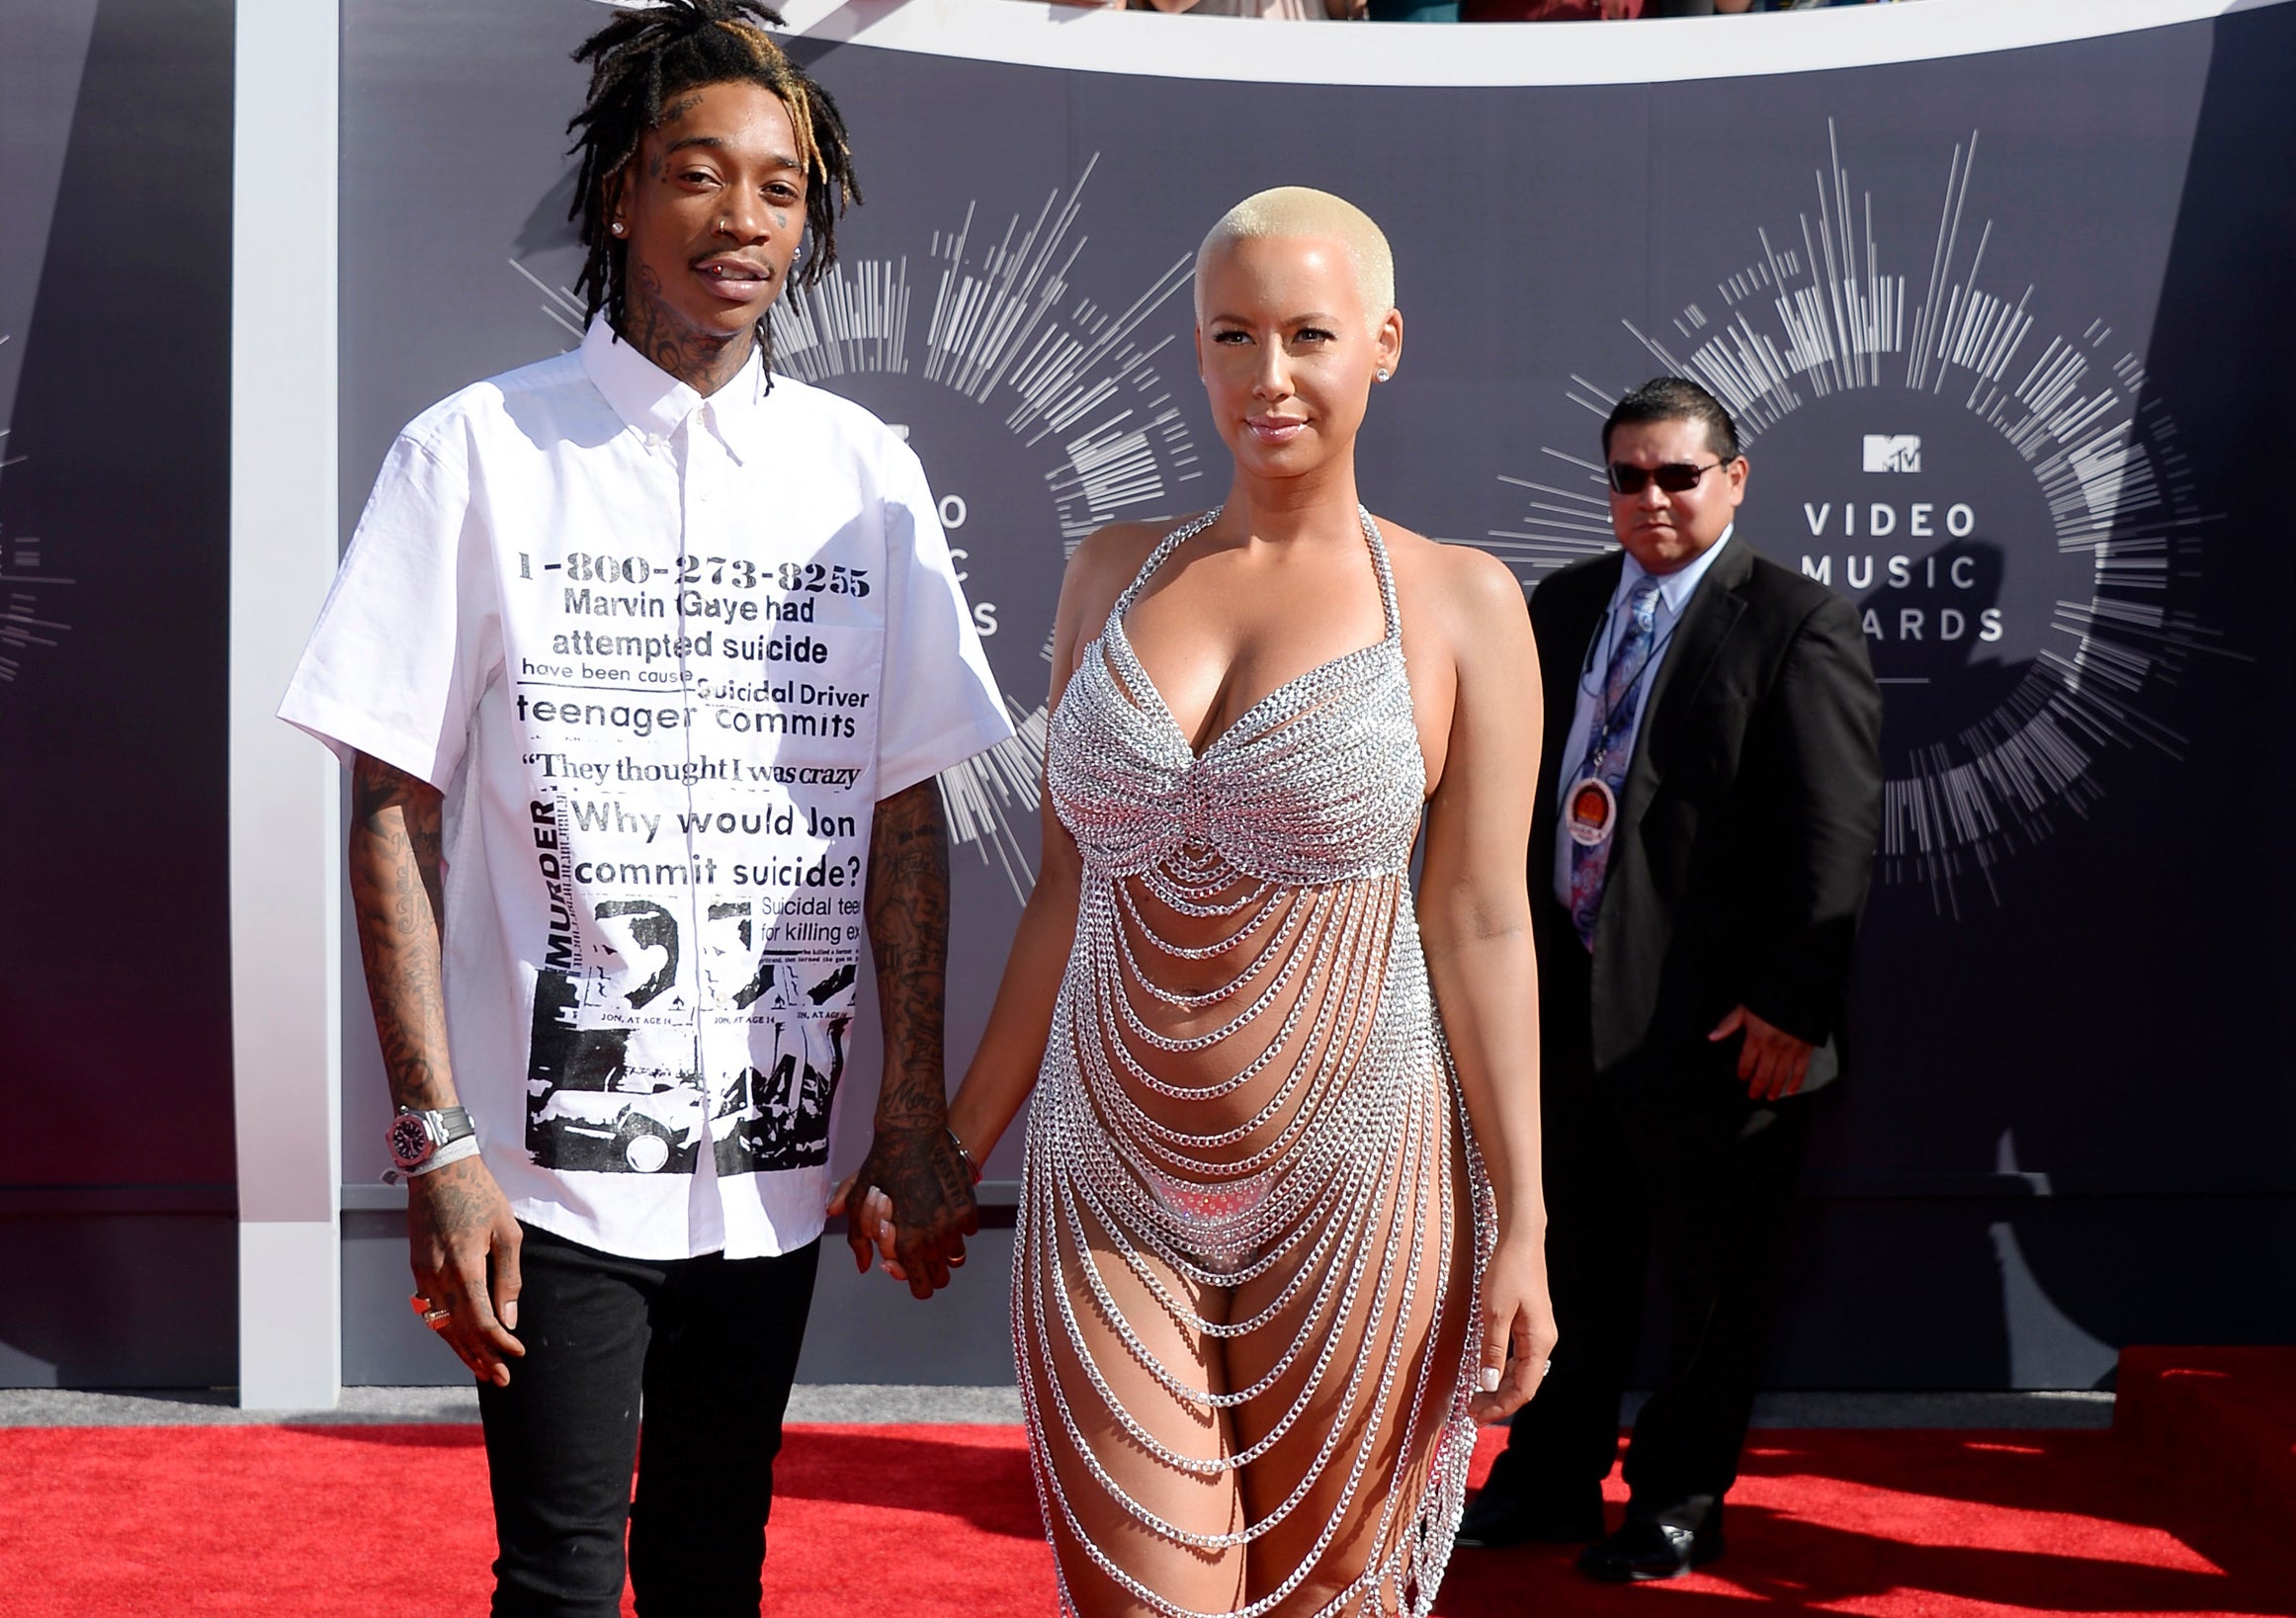 Amber Rose channels Rose by rocking interesting silver chain dress at VMAs | The Independent | The Independent